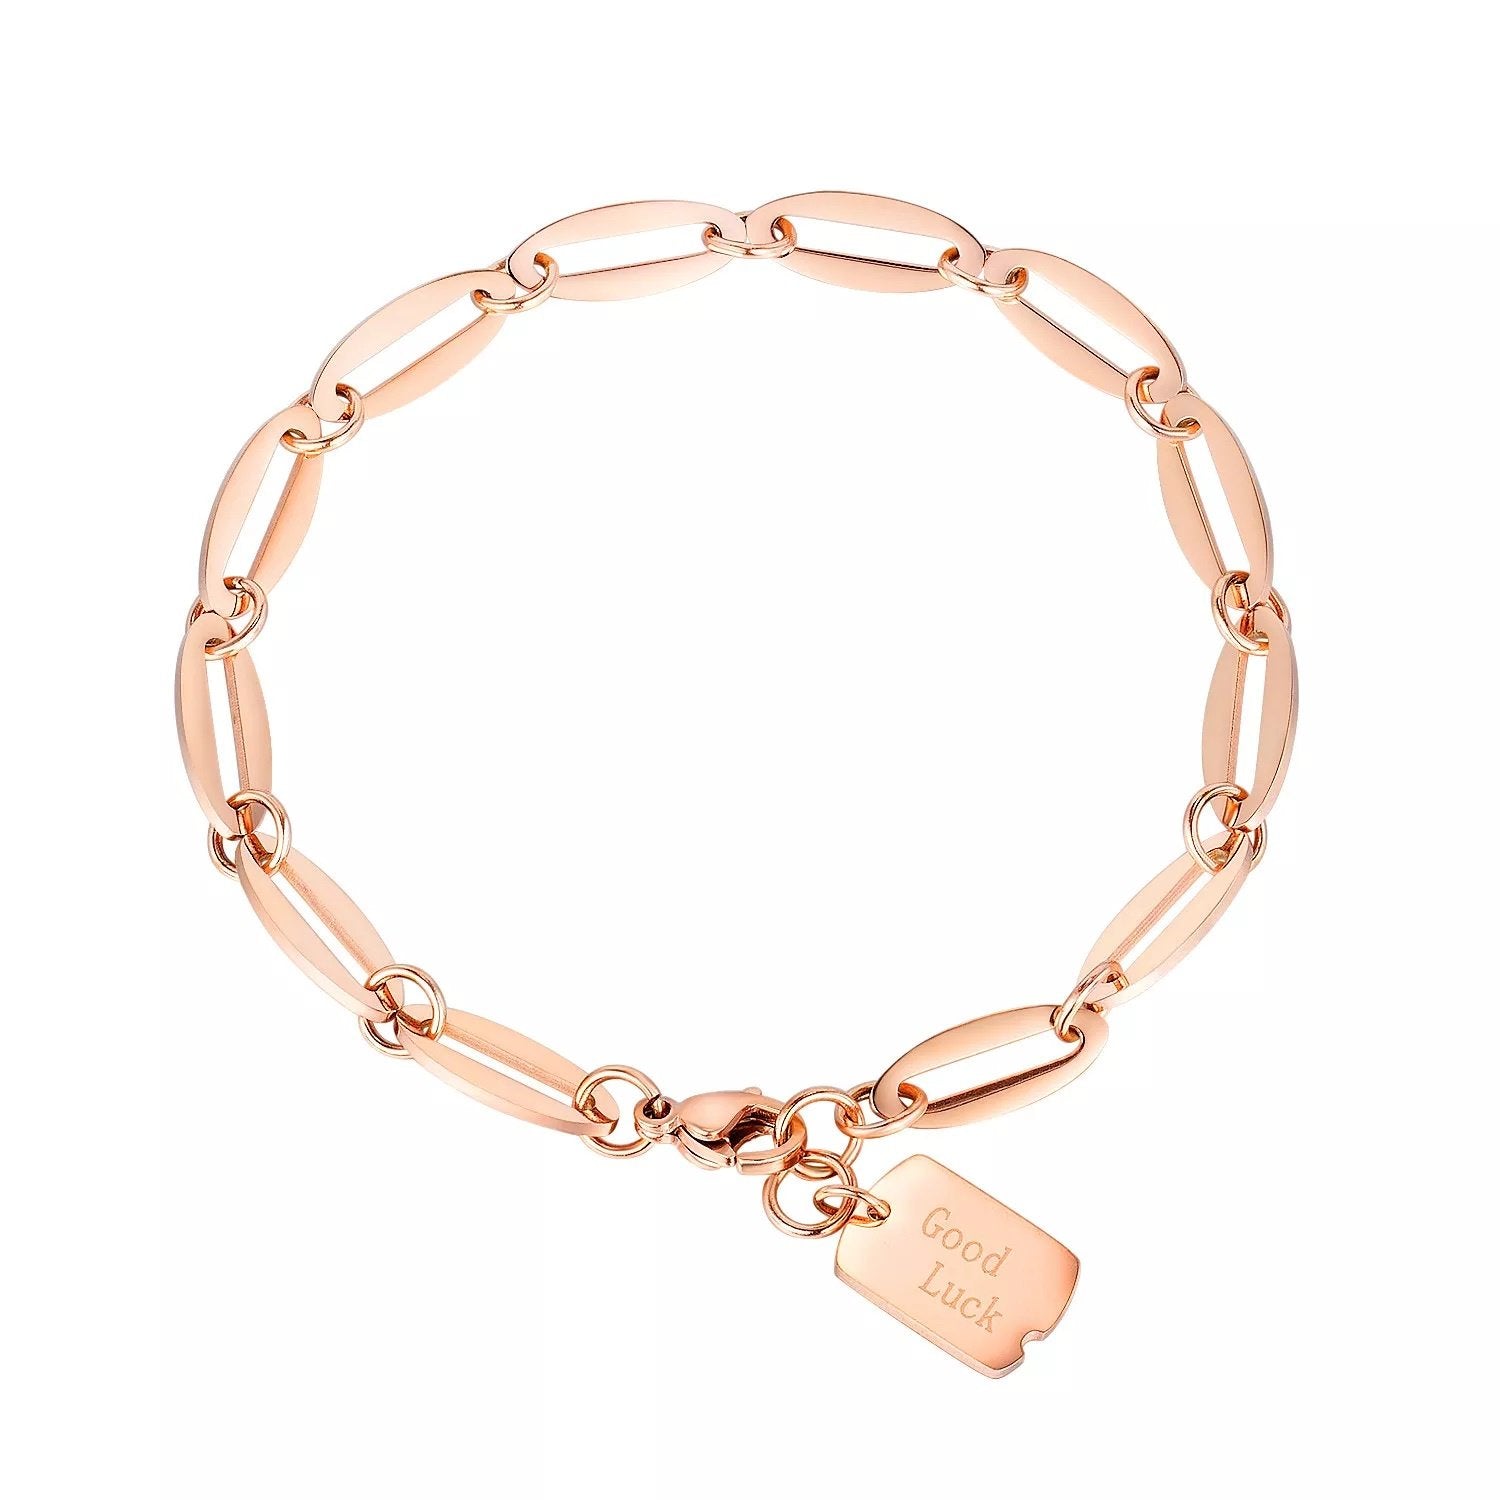 Stainless Steel Happy Face Charm Bracelet Rose Gold Plated